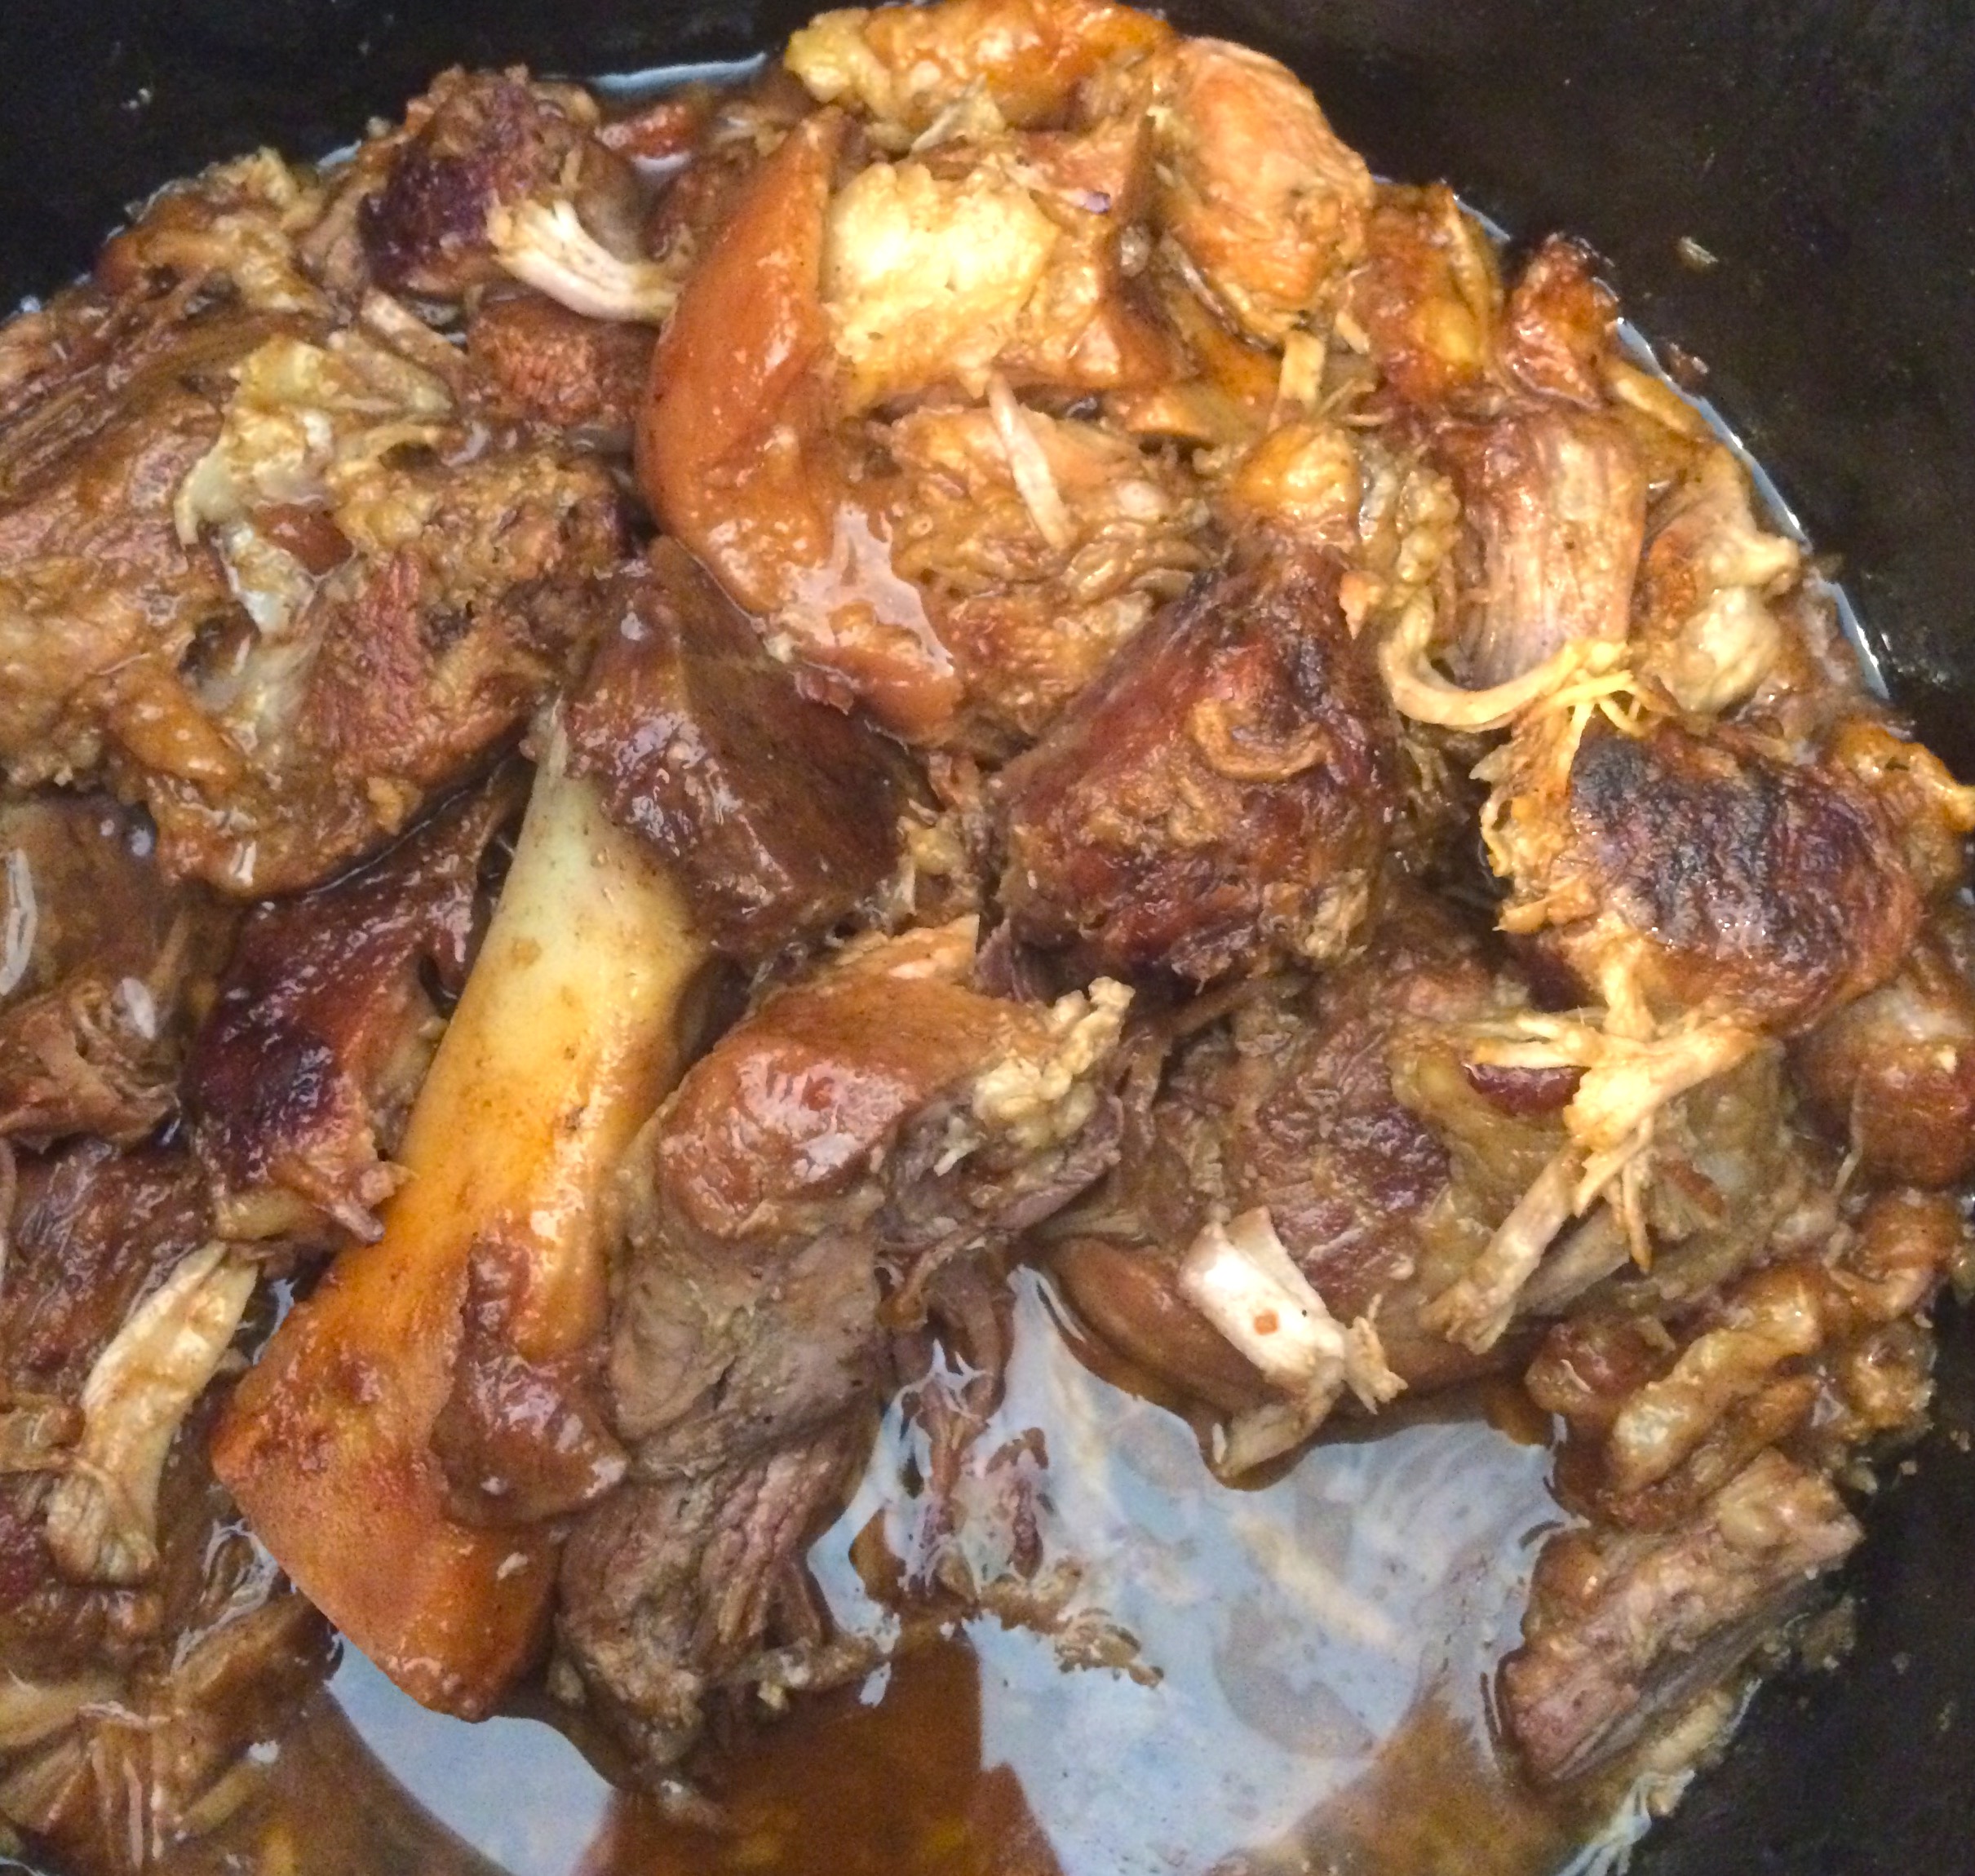 This is how it looks when it's done cooking. Just pull it apart, get rid of the fat and bone, and serve it.